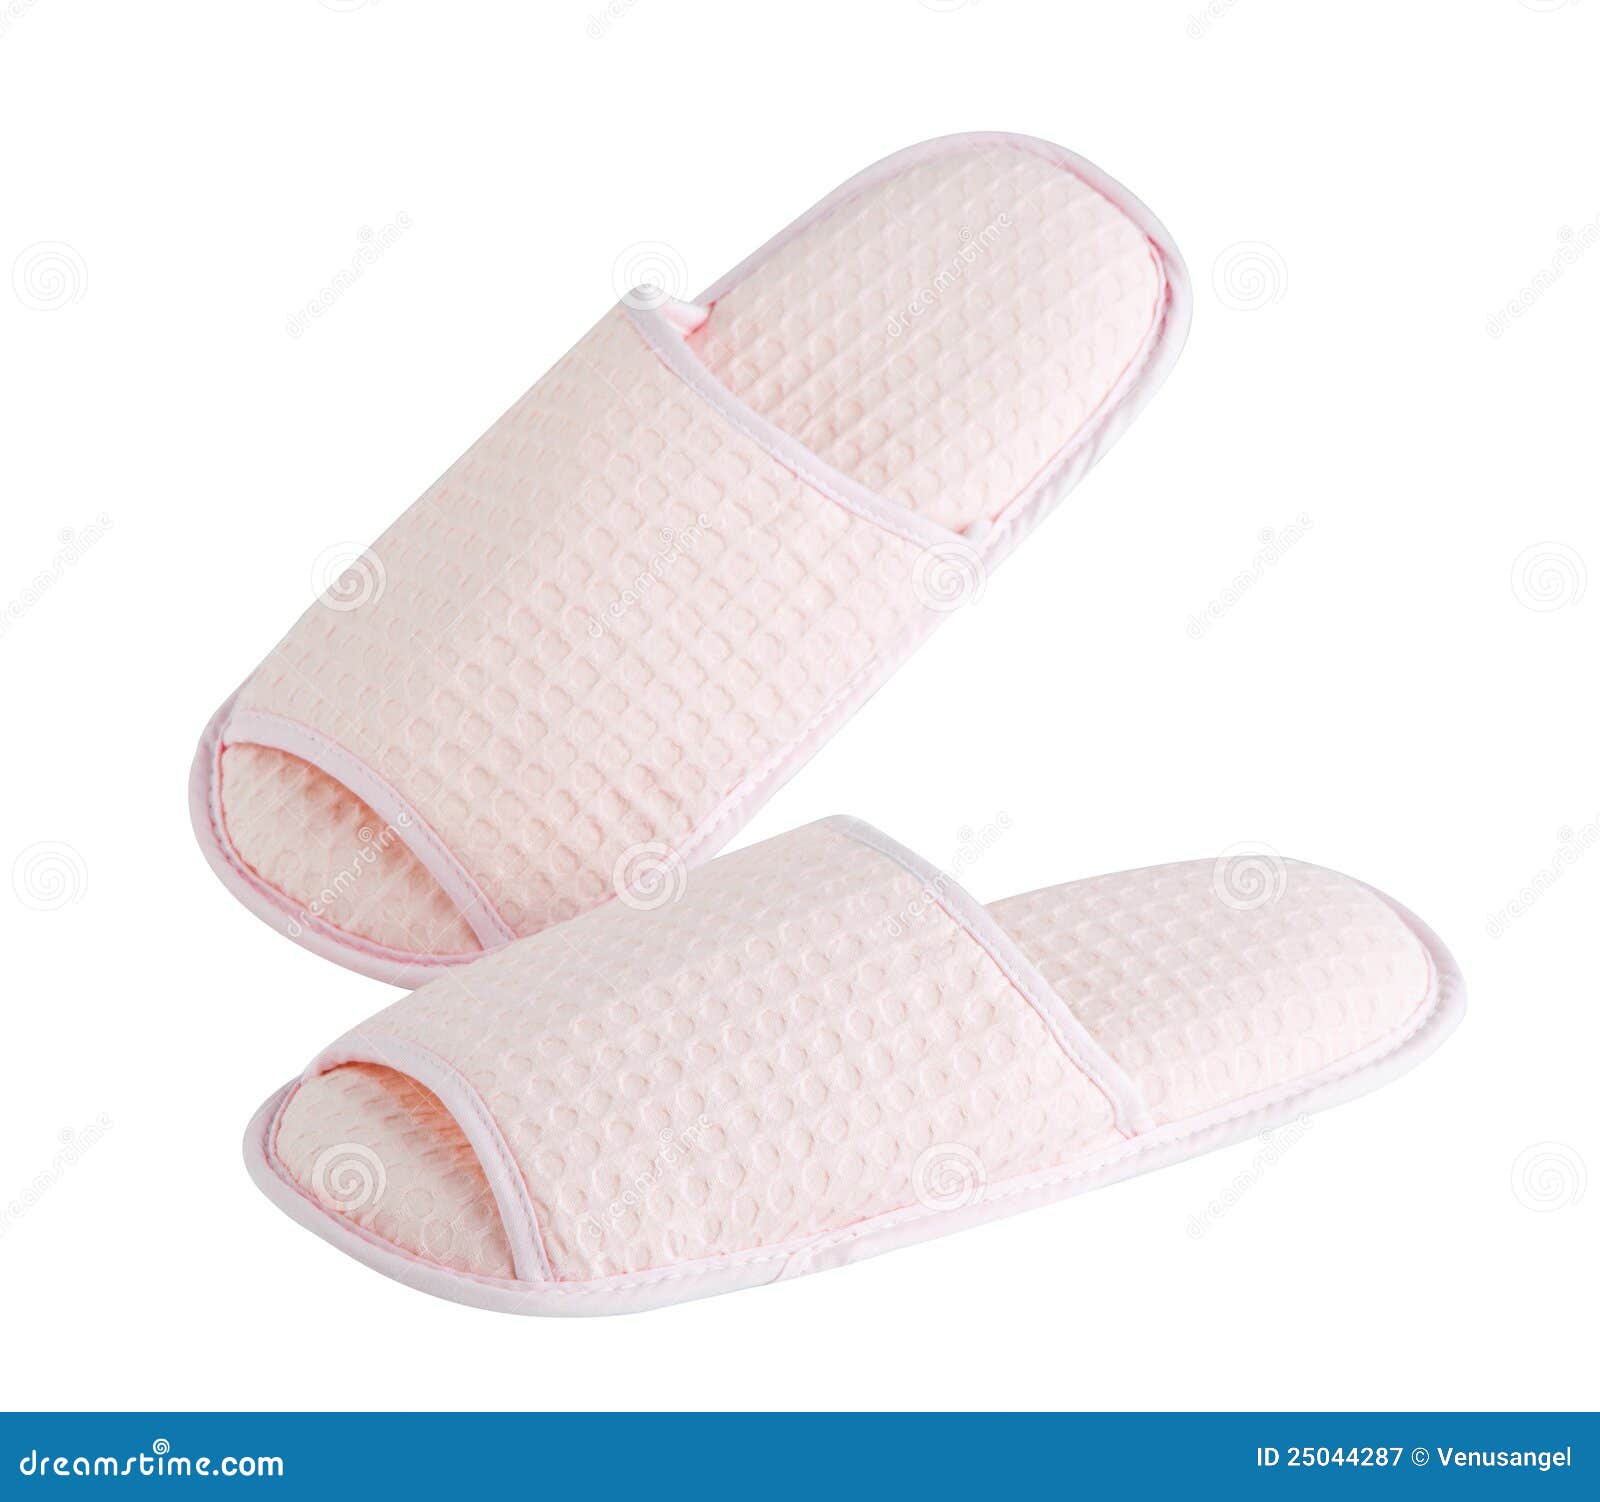 House slippers stock image. Image of dirty, convenience - 25044287